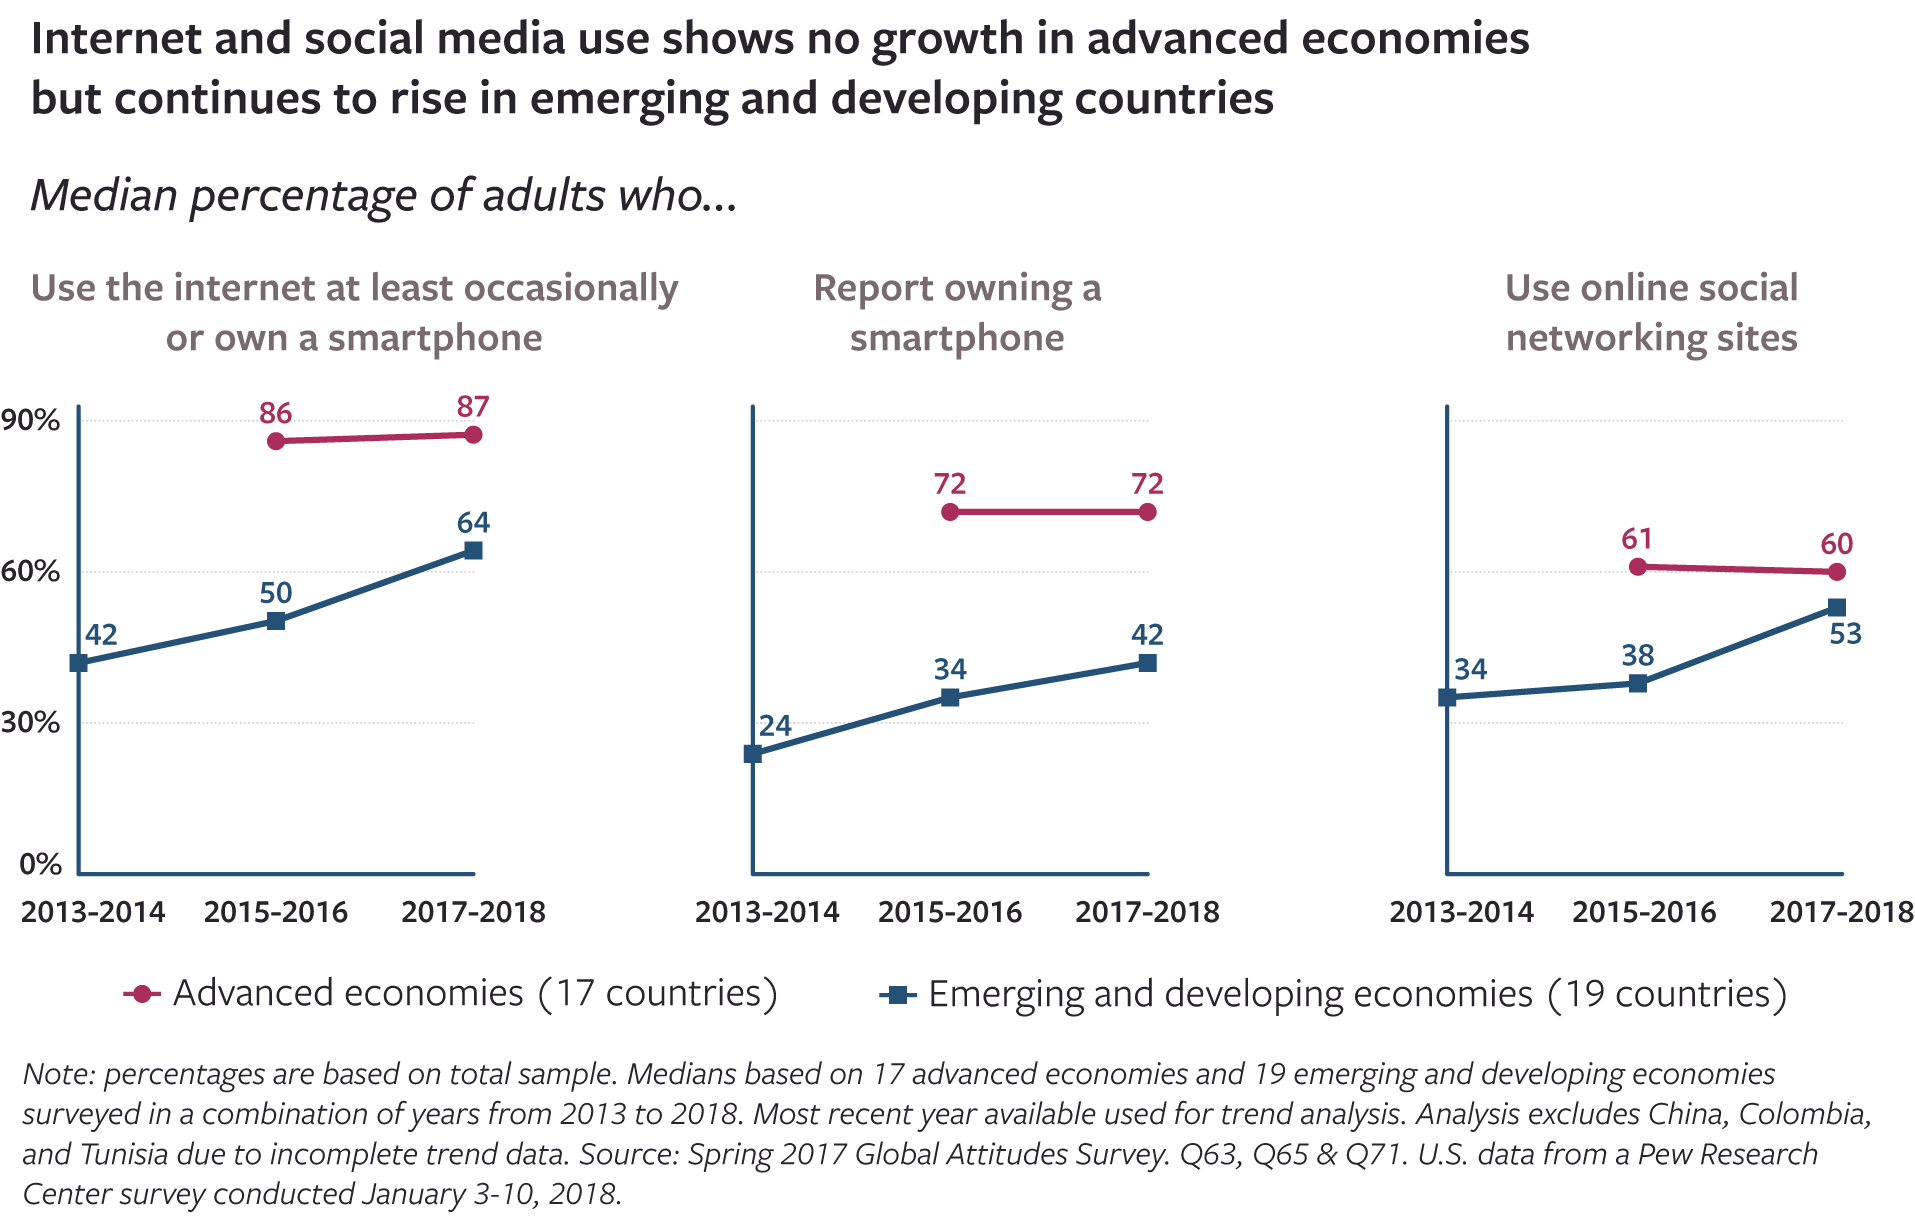 Graph of internet and social media use showing no growth in advanced economies but continued increase in emerging and developing countries